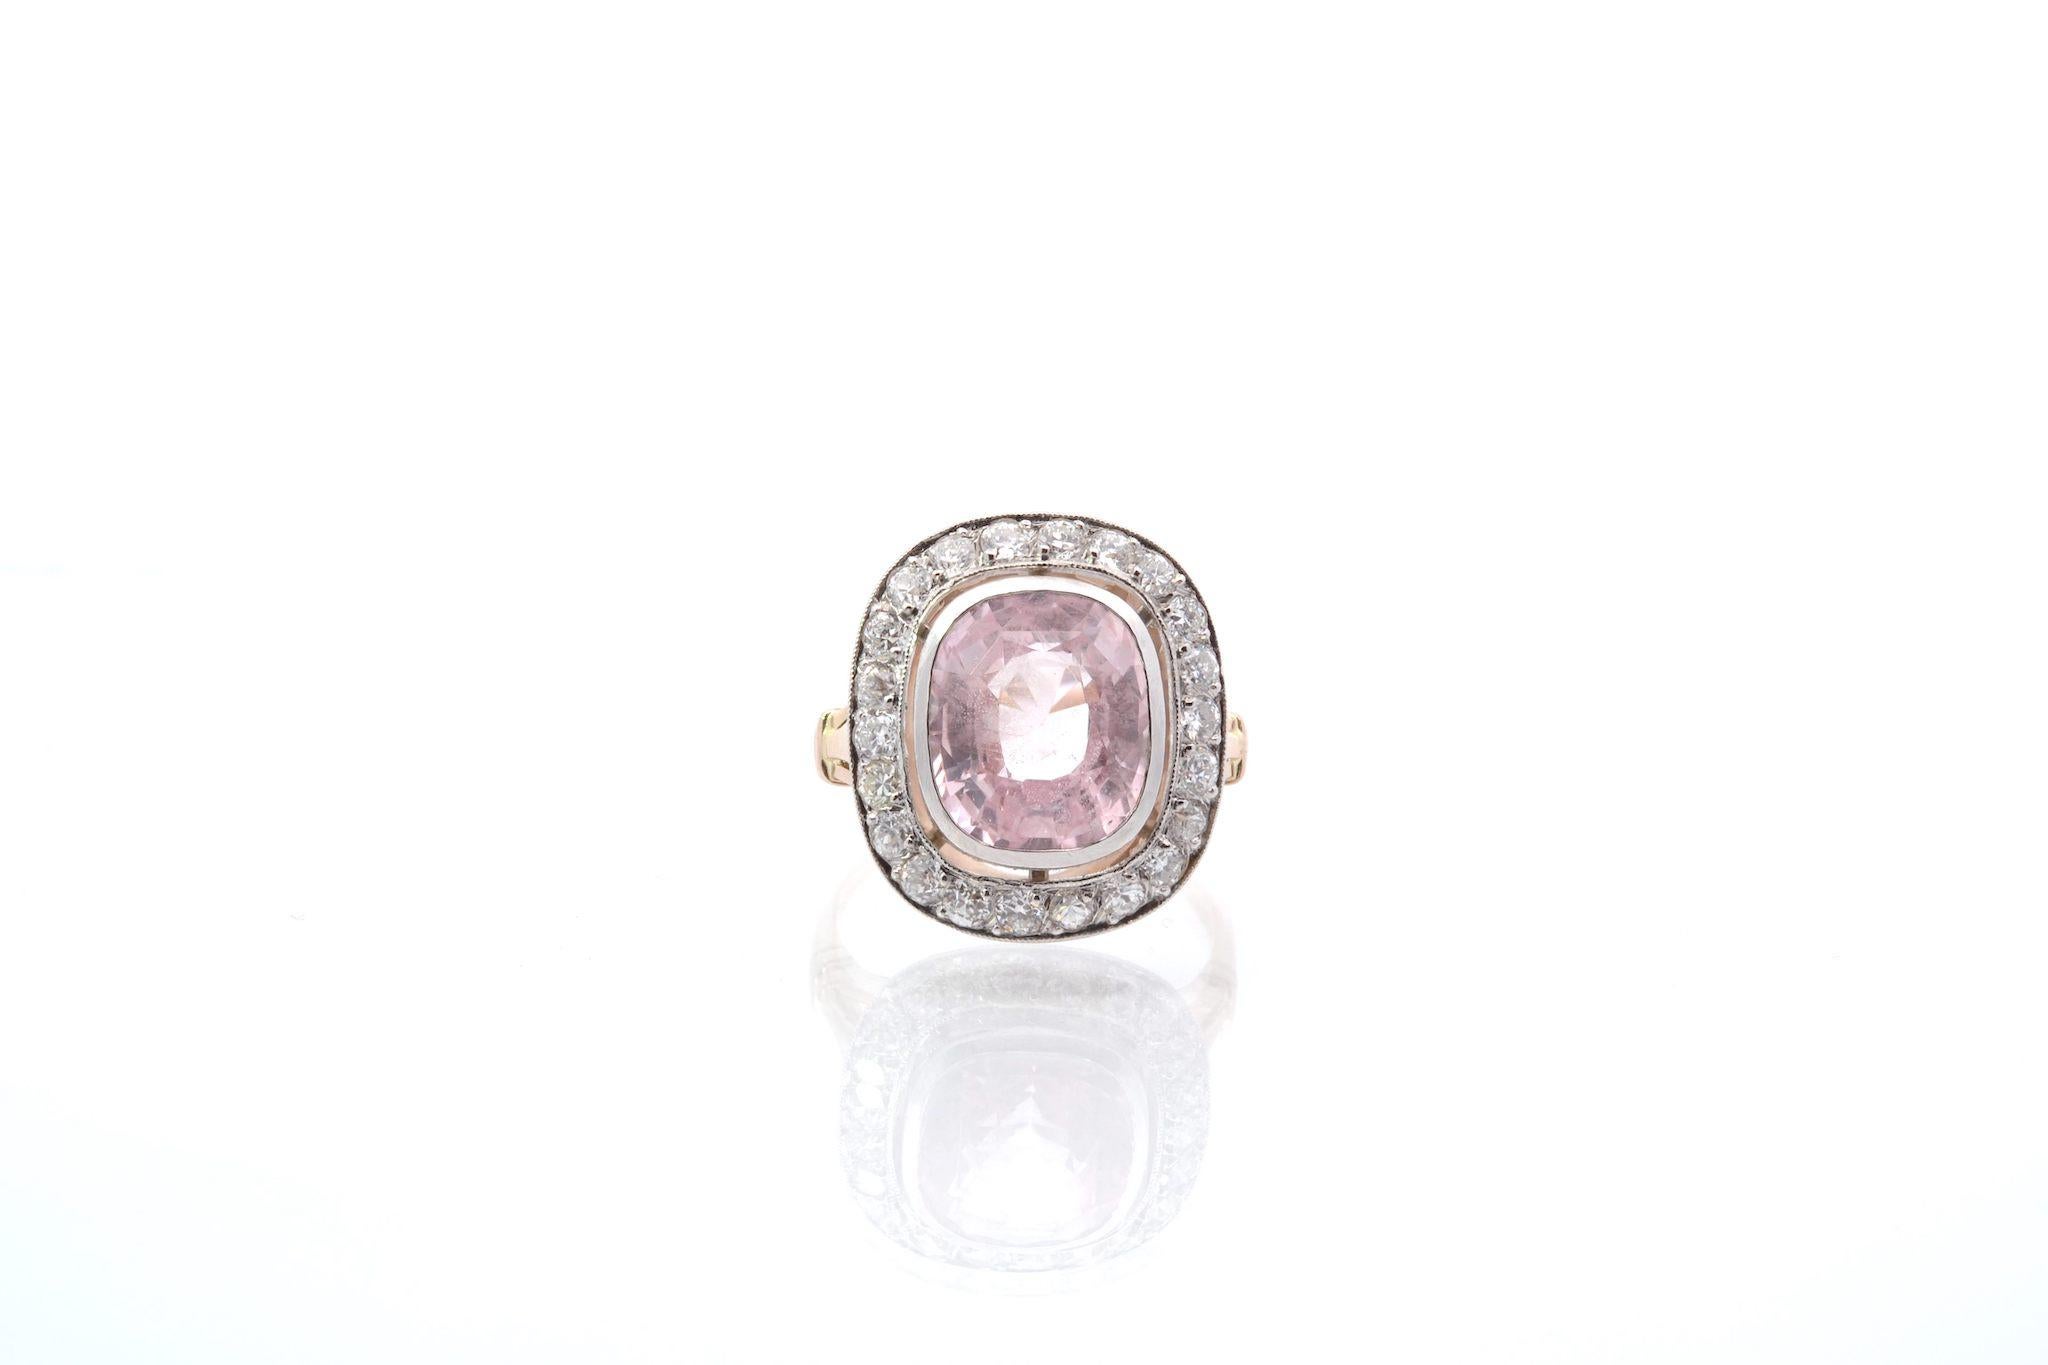 Stones: Pink sapphire: 5.65 cts, 22 diamonds: 0.80 ct.
Material: Rose gold and platinum
Dimensions: 1.8 x 1.6 cm
Weight: 7g
Period: Recent 1900 style (handmade)
Size: 52 (free sizing)
Certificate
Ref. : 25315 25091